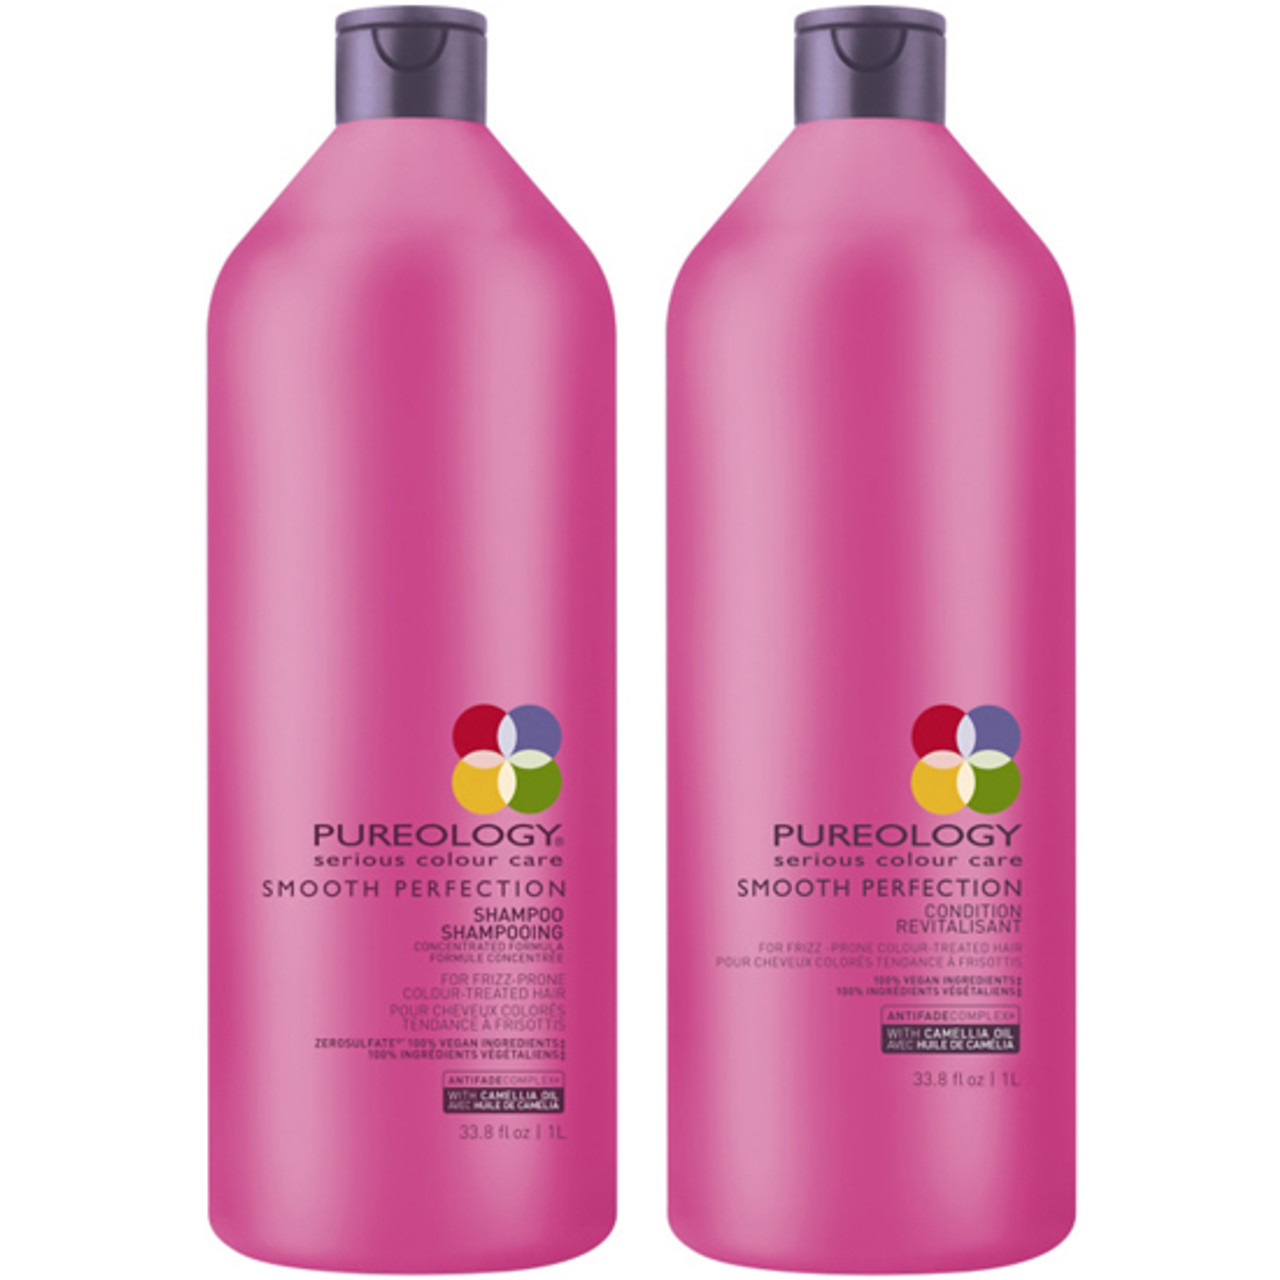 Pureology Smooth Perfection Shampoo and Conditioner Duo 33.8 oz